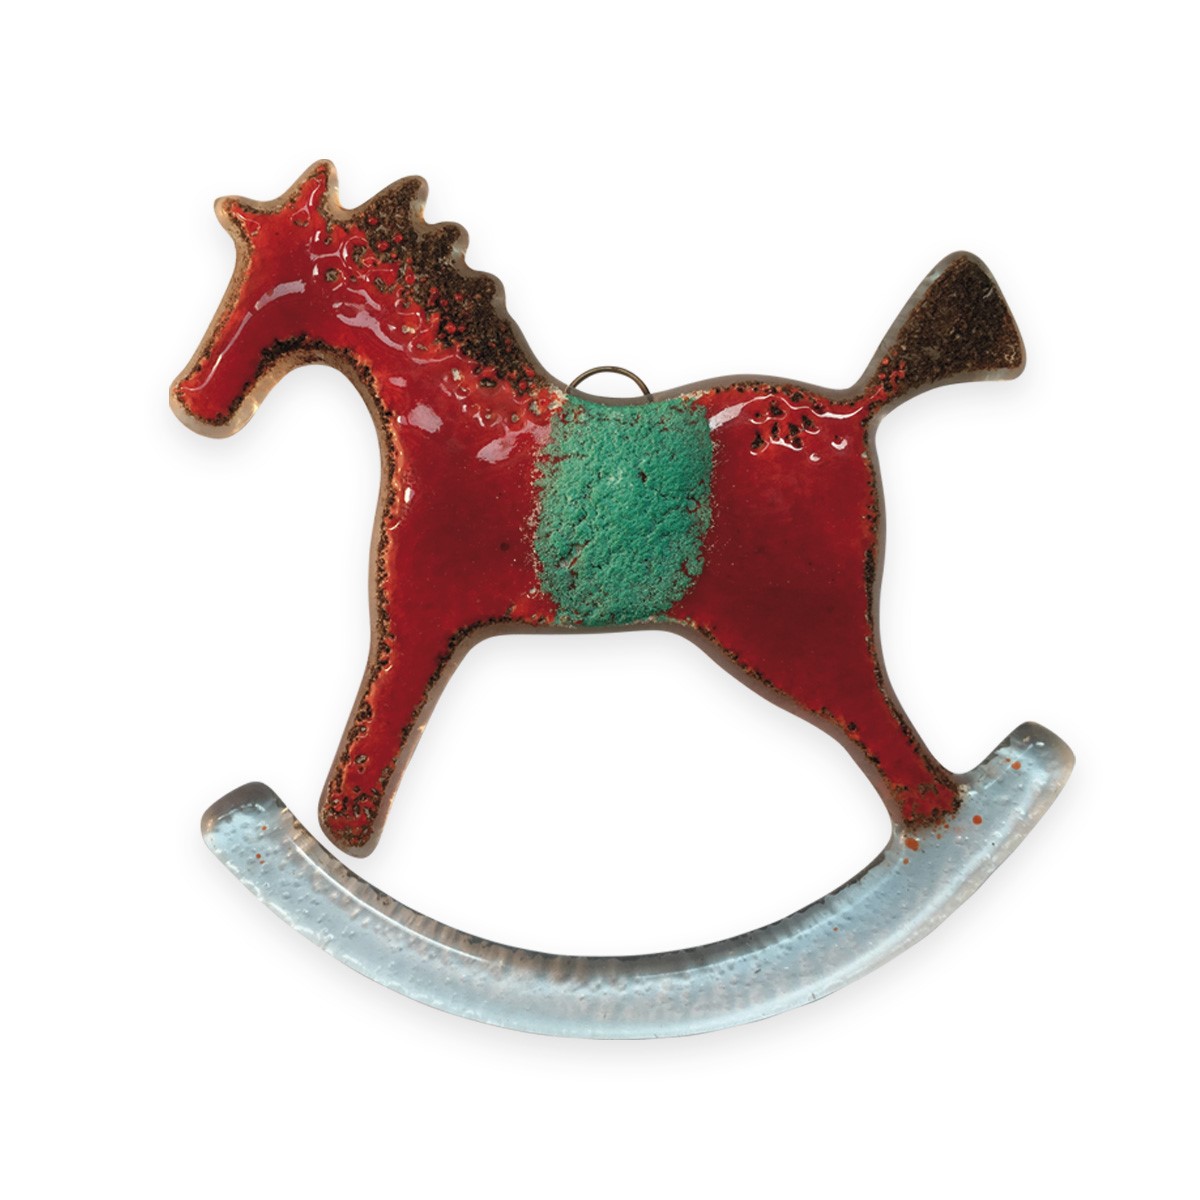 Rocking Horse : Red : Tree ornament  : 1643-17 by Nobile'  